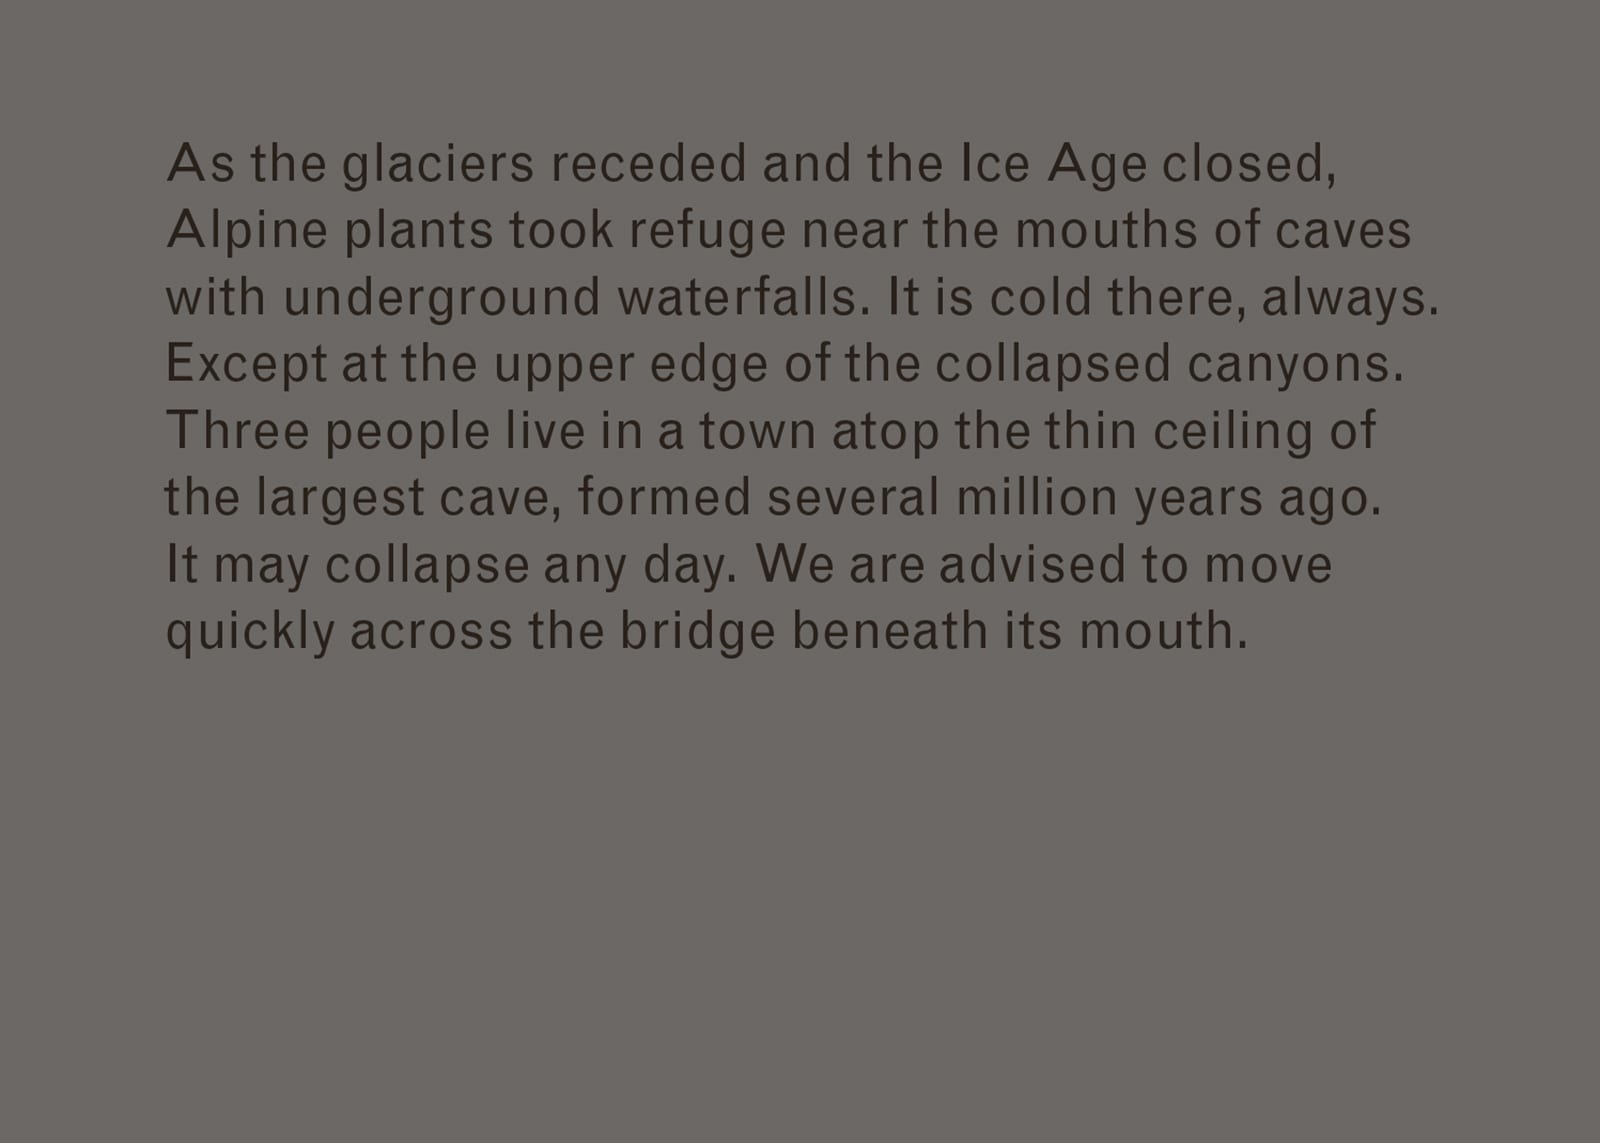 Excerpt of text from Imaginary Explosions. Text reads: As the glaciers receded and the Ice Age closed, Alpine plants took refuge near the mouths of caves with underground waterfalls. It is cold there, always. Except at the upper edge of the collapsed canyons. Three people live in a town atop the thin ceiling of the largest cave, formed several million years ago. It may collapse any day. We are advised to move quickly across the bridge beneath its mouth.